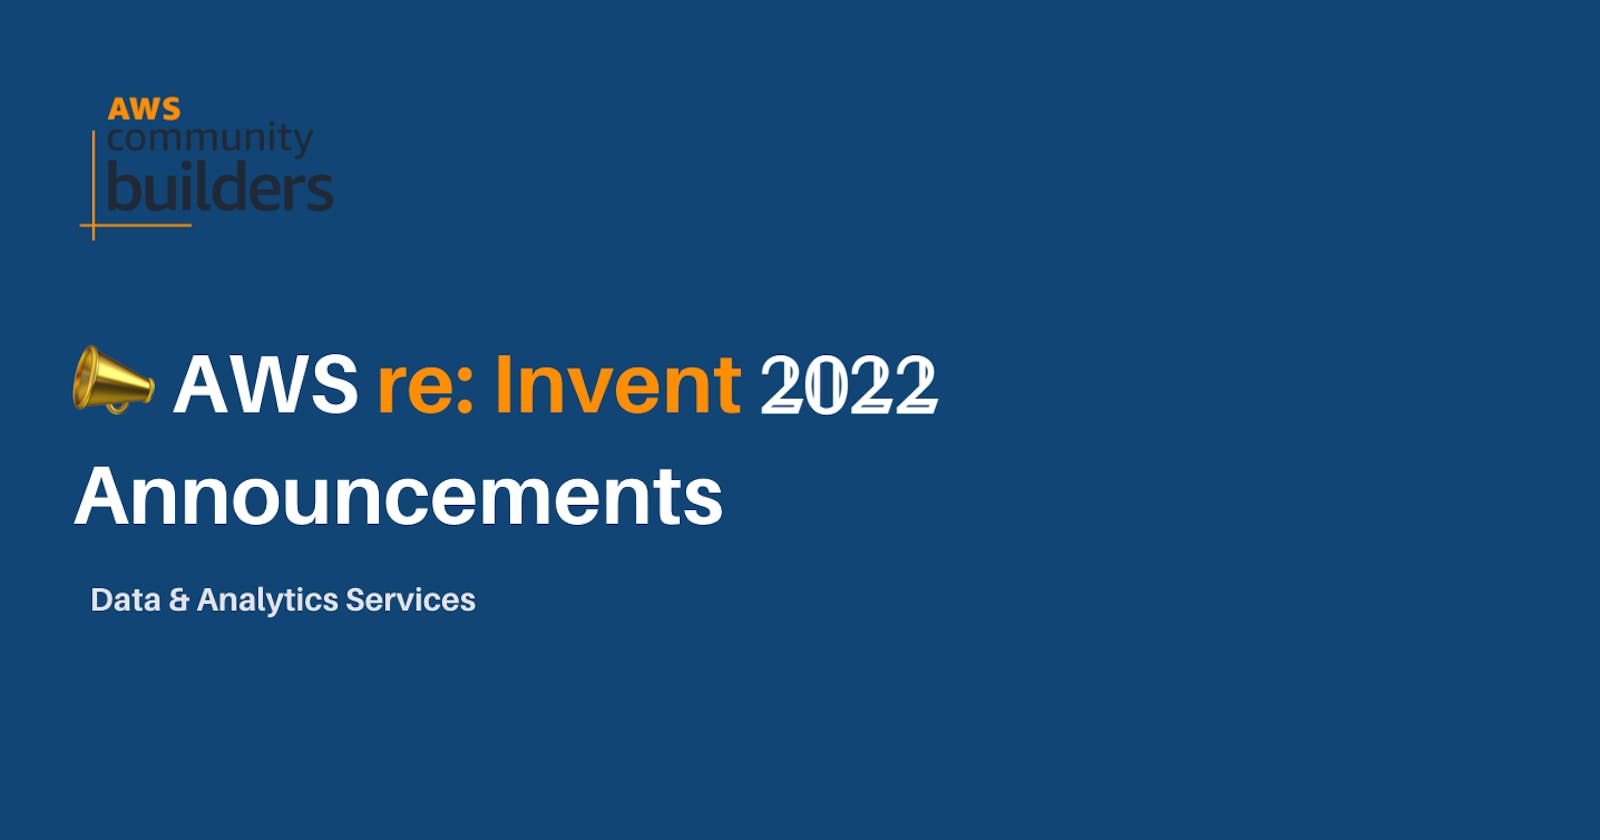 Data & Analytics Services at AWS re:Invent 2022: A Recap